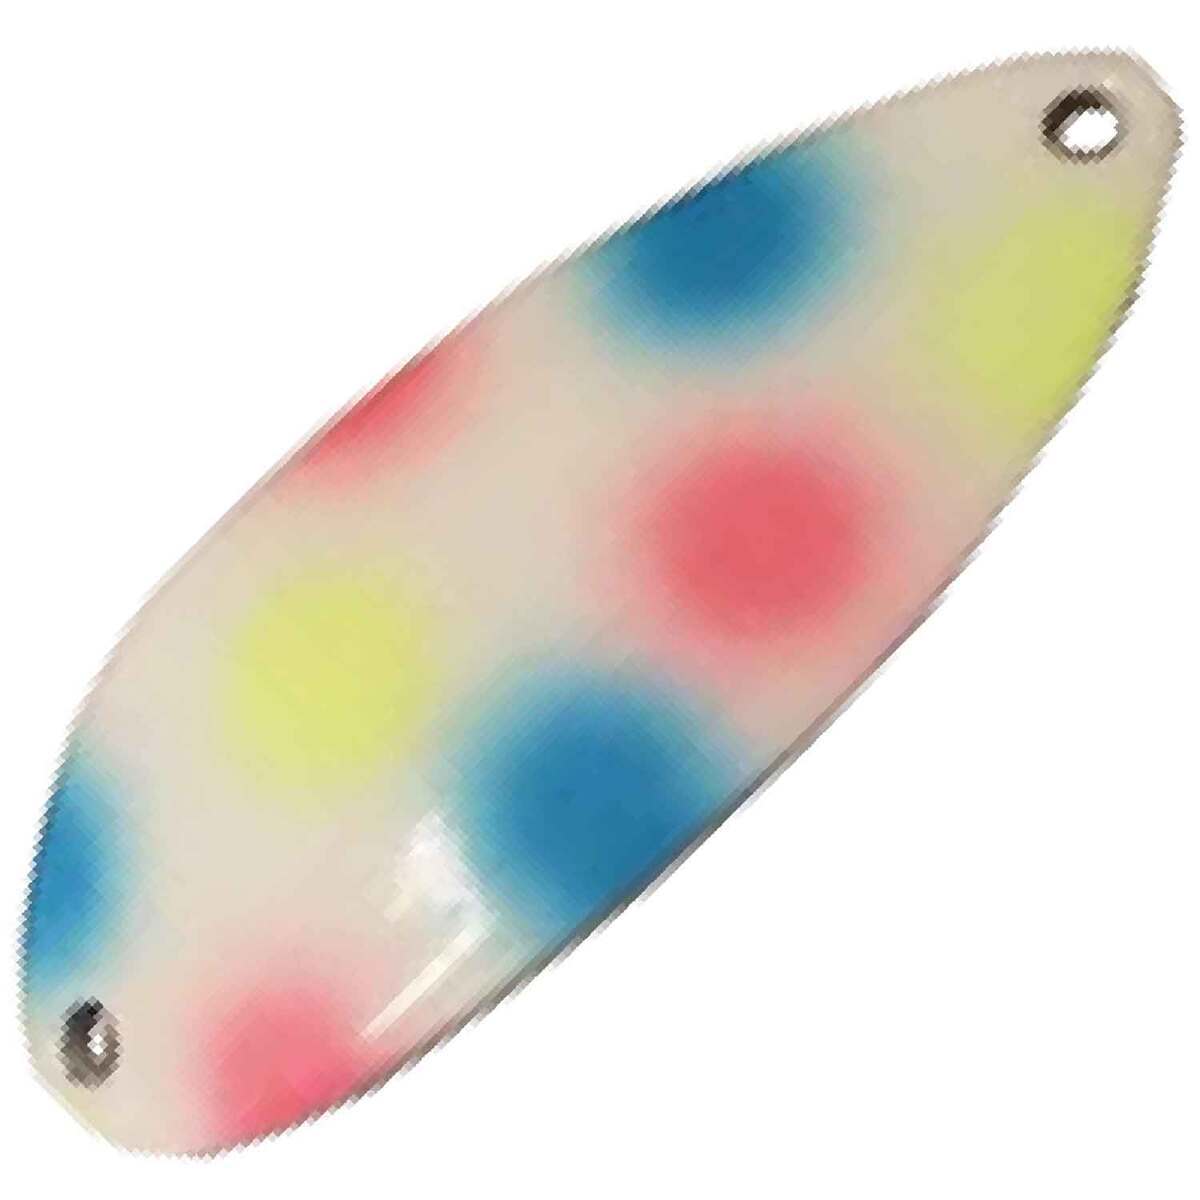 Acme Tackle Little Cleo Spoons - Glowing 3/4 Oz. Various Patterns #C-340 -  Al Flaherty's Outdoor Store